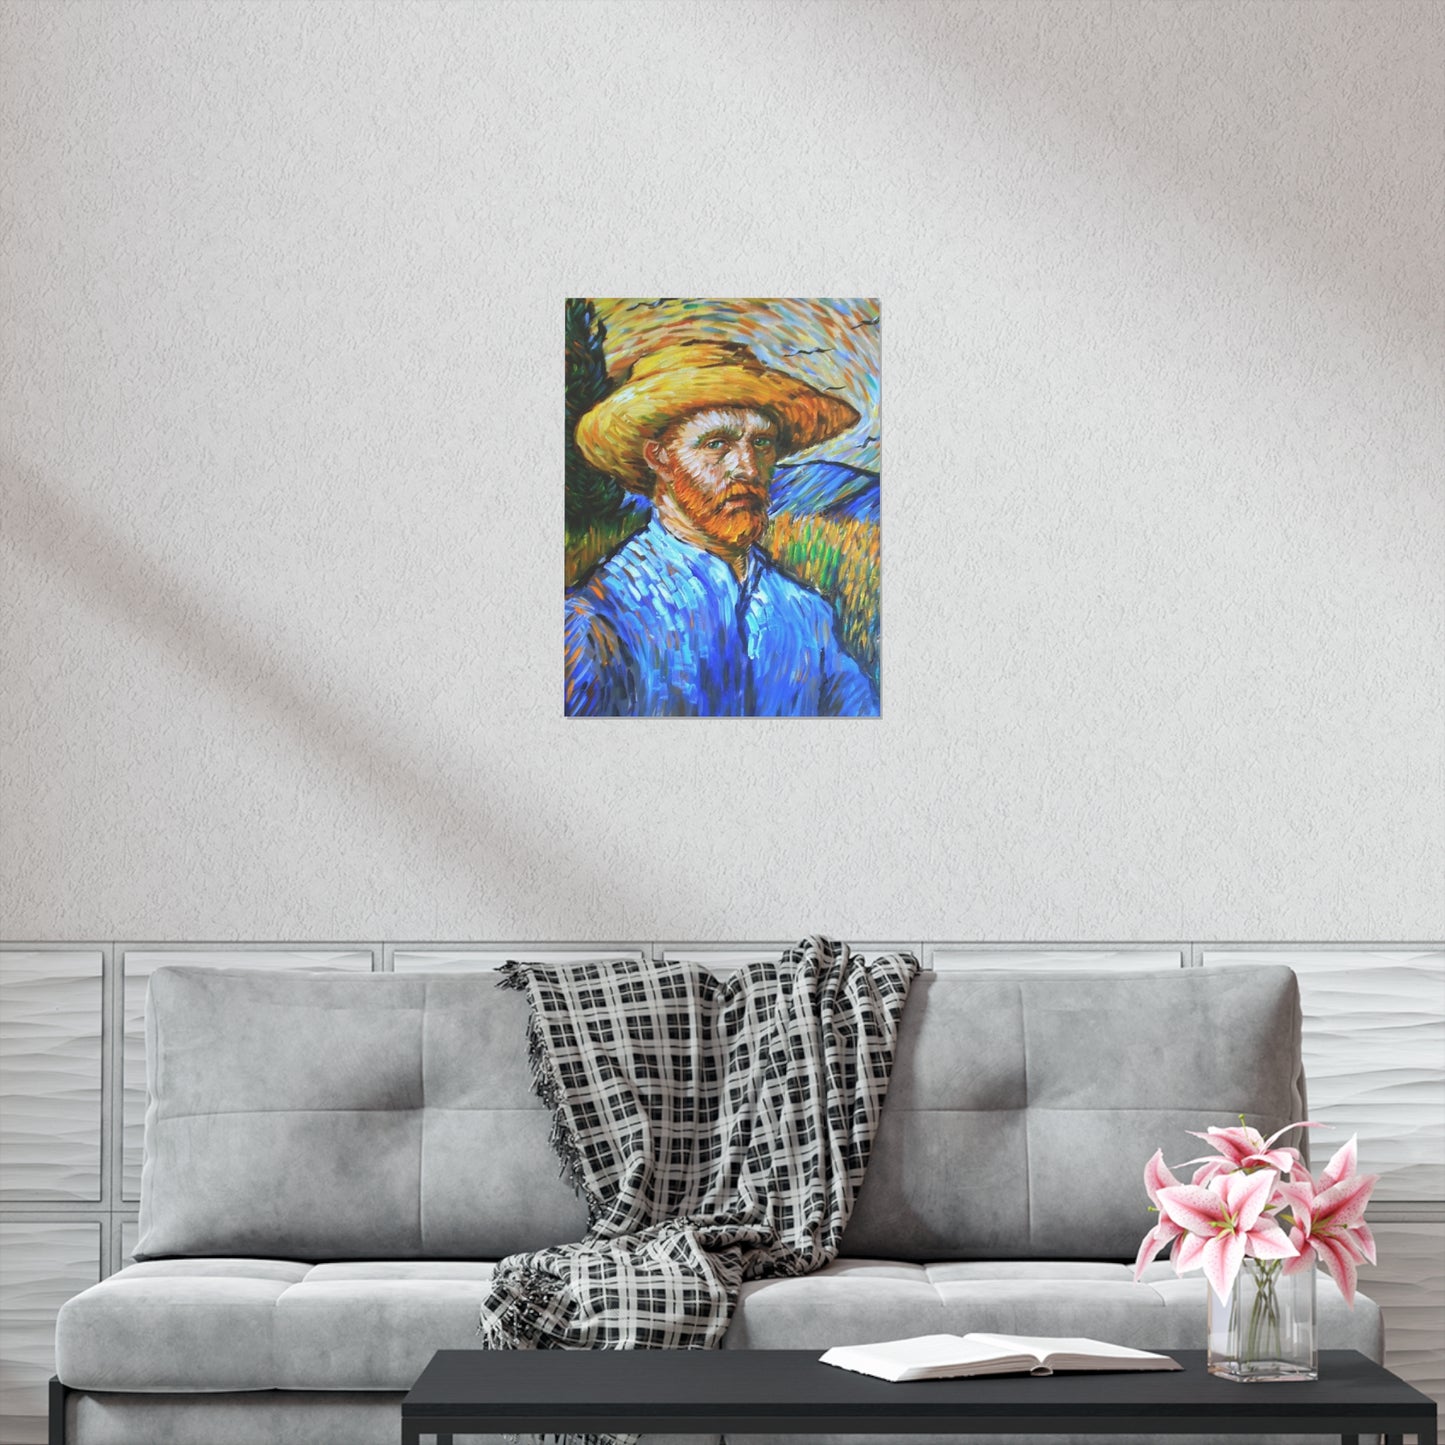 "Discover Van Gogh's Soul: Self-Portrait Premium Matte Vertical Posters - A Masterpiece for Your Wall!"Van Gogh self portrait* Premium Matte Vertical Posters art fine art wall art gift bestseller